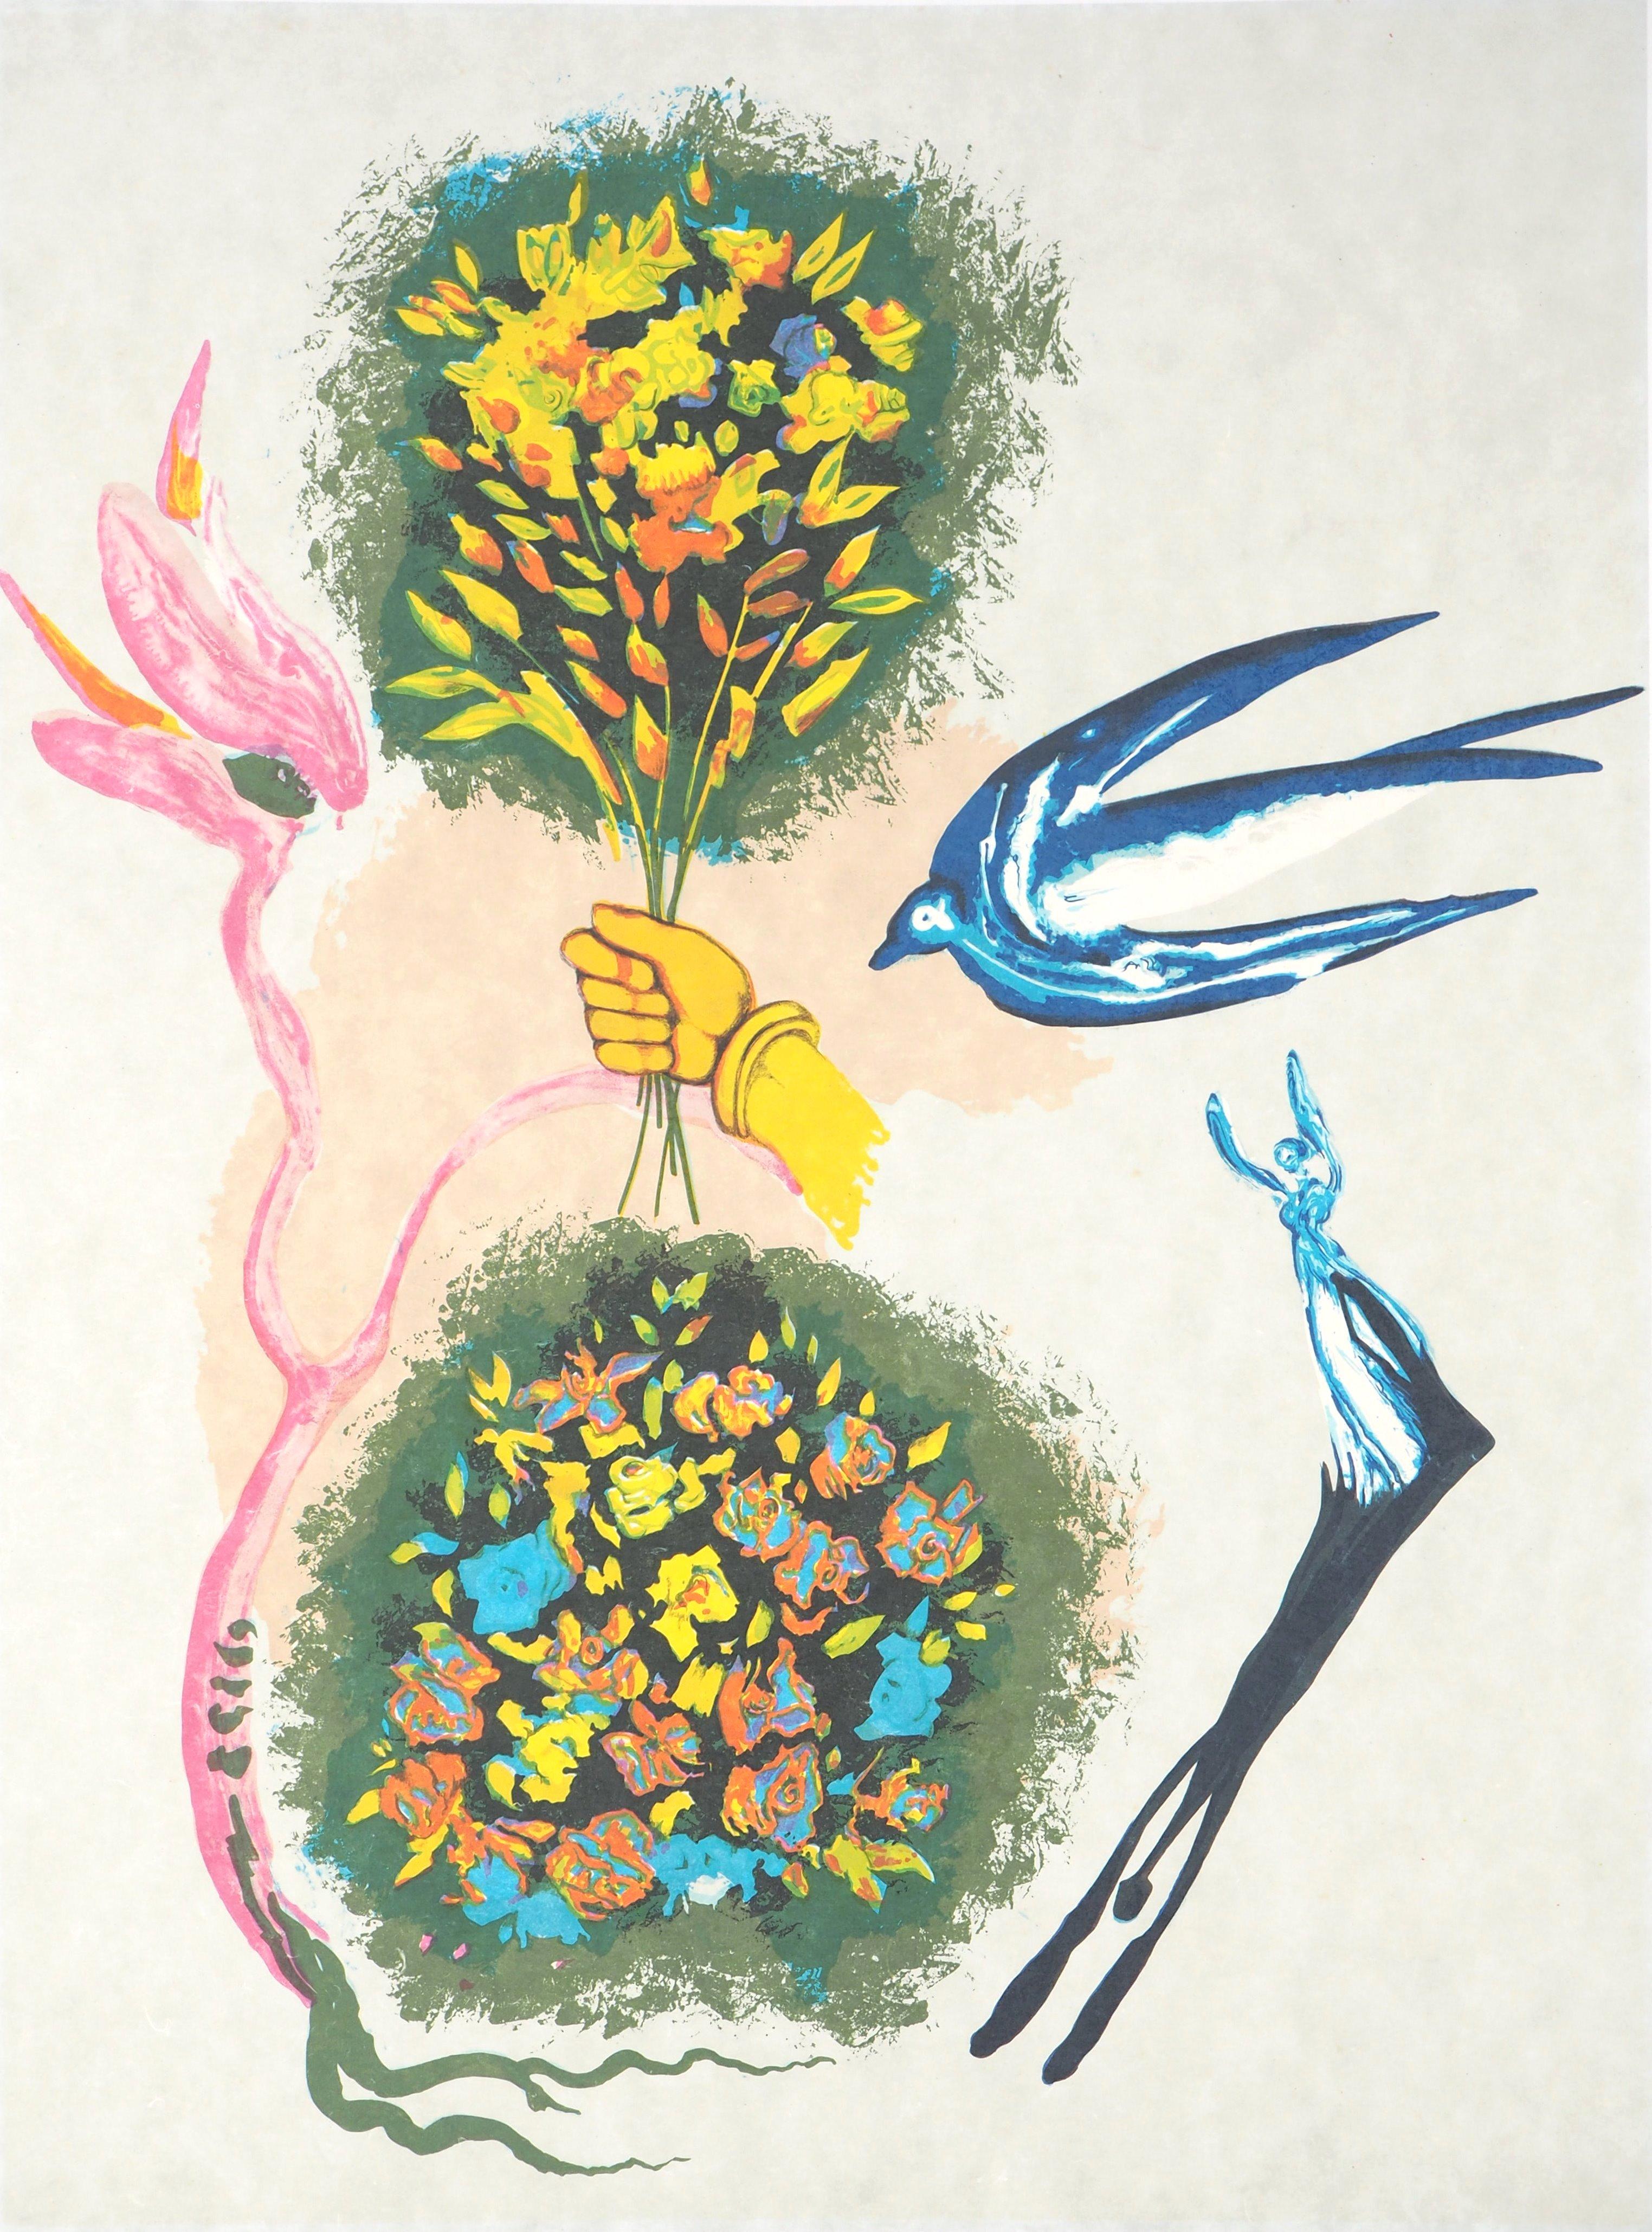 Salvador Dalí Figurative Print - The Magic Butterfly and Flowers : Apparition of the Rose - Handsigned lithograph